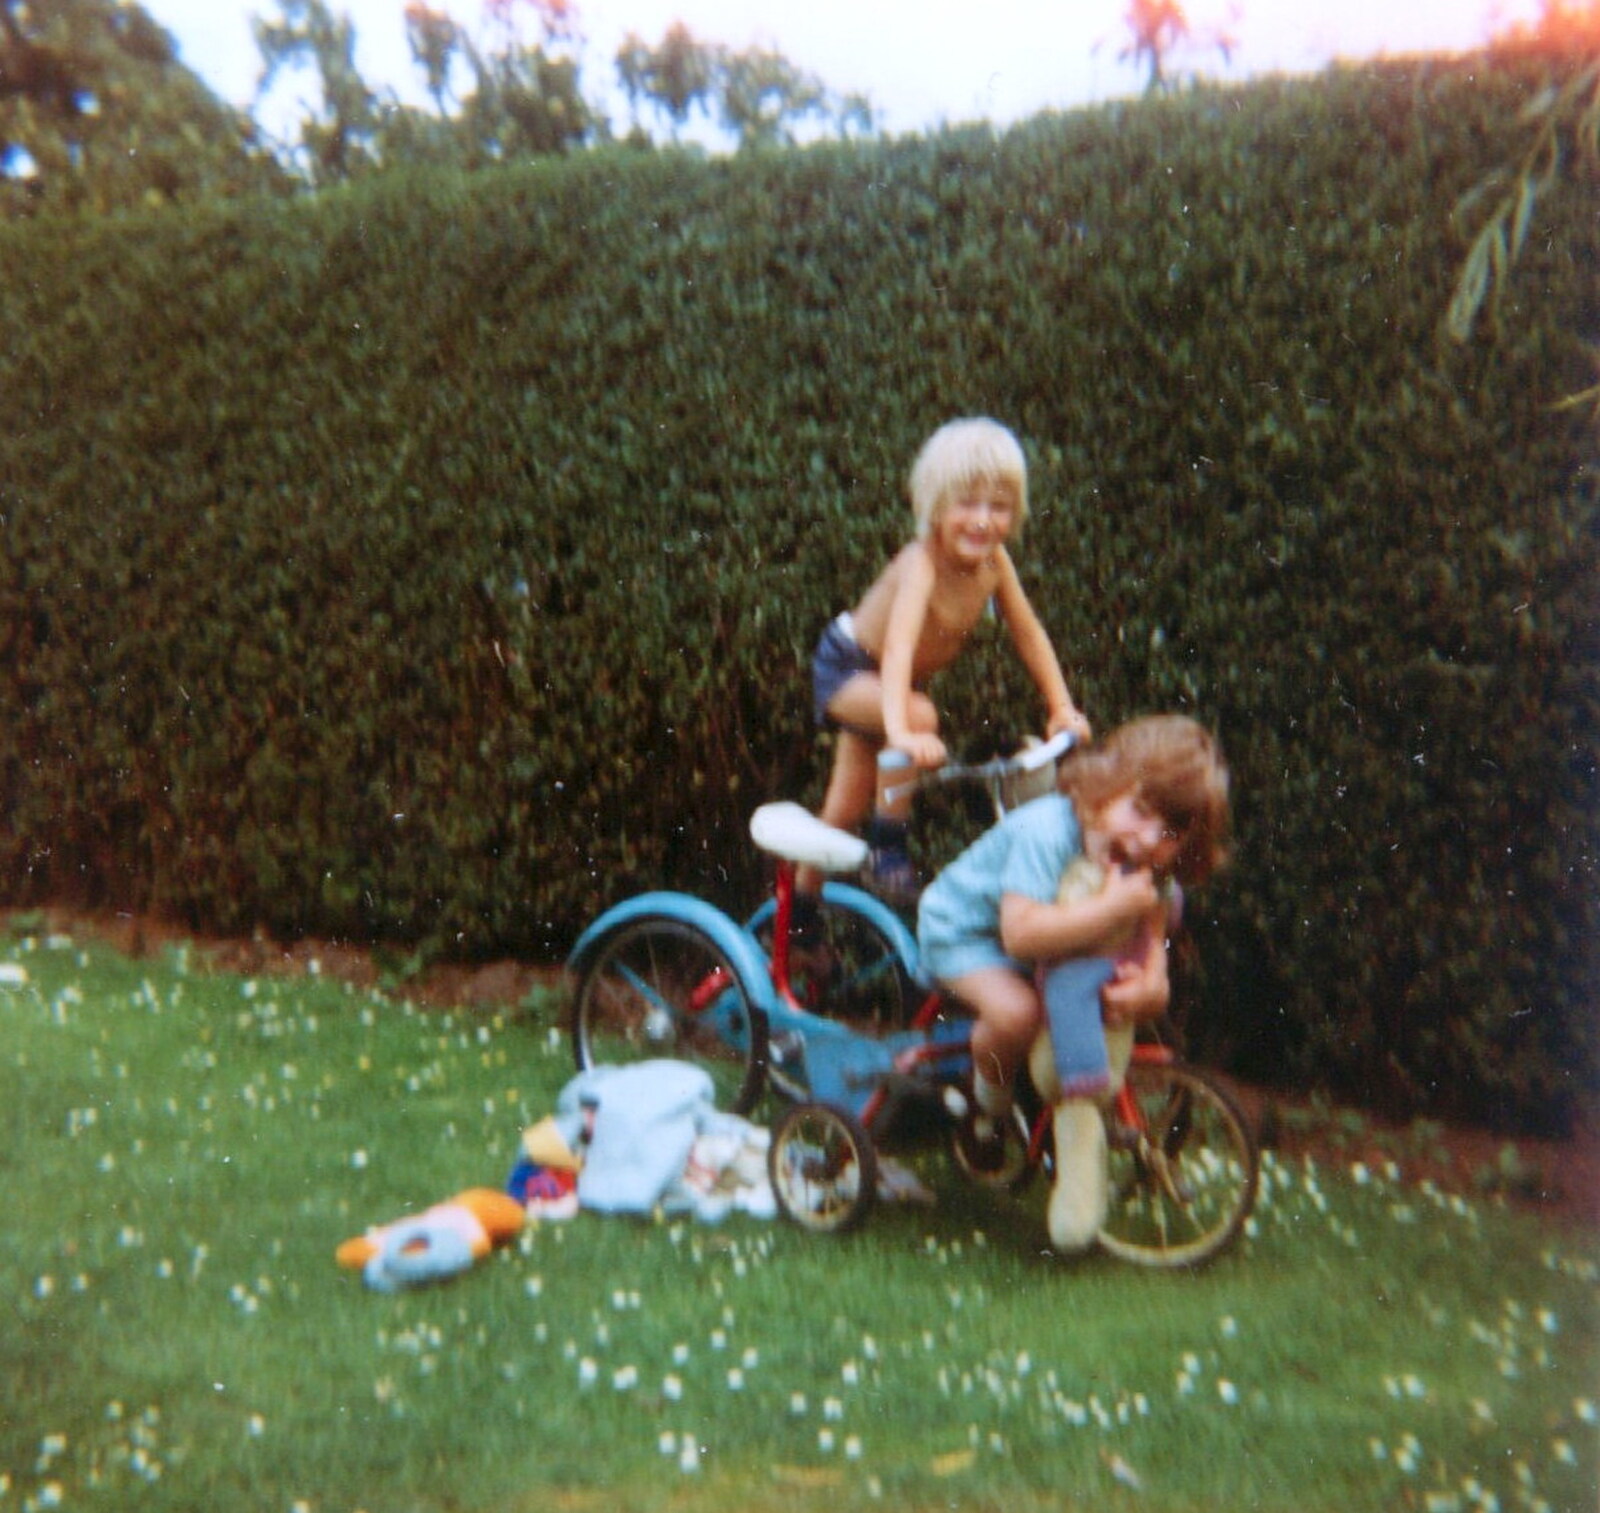 On a tricycle in the back garden from Family History: Raven Road, Timperley, Altrincham - 24th January 2020